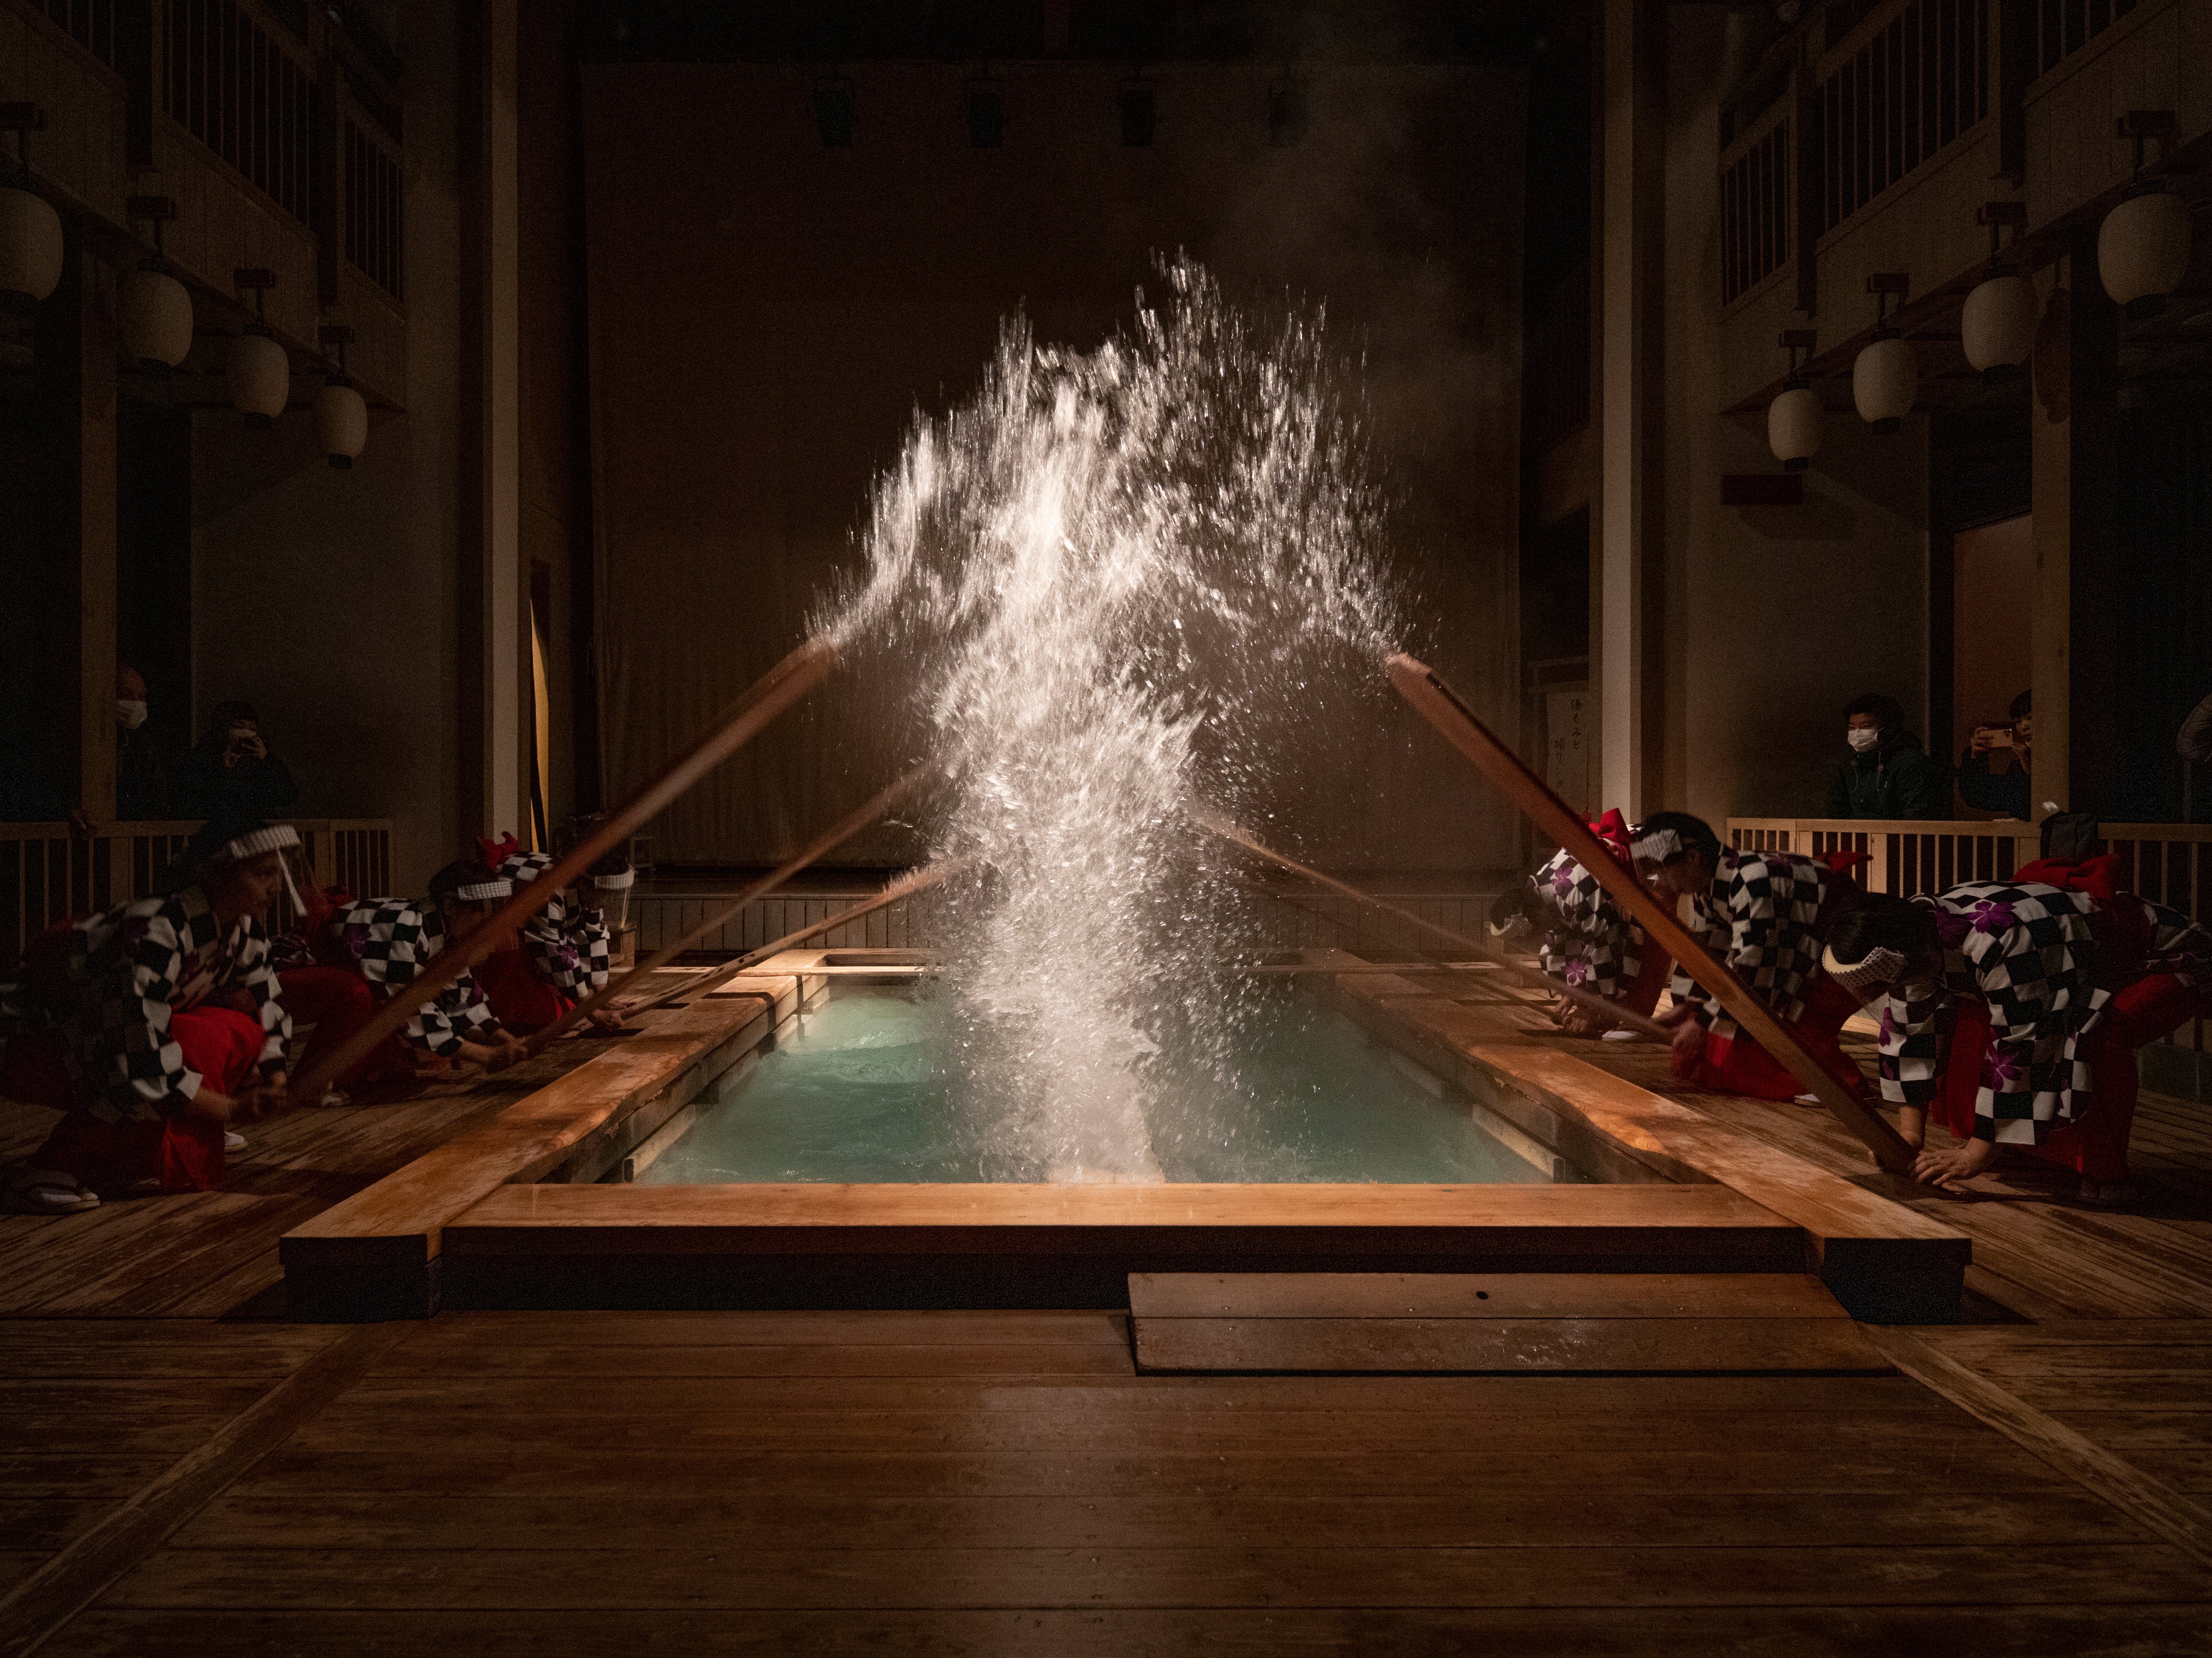 Onsen culture has deep roots in Japan